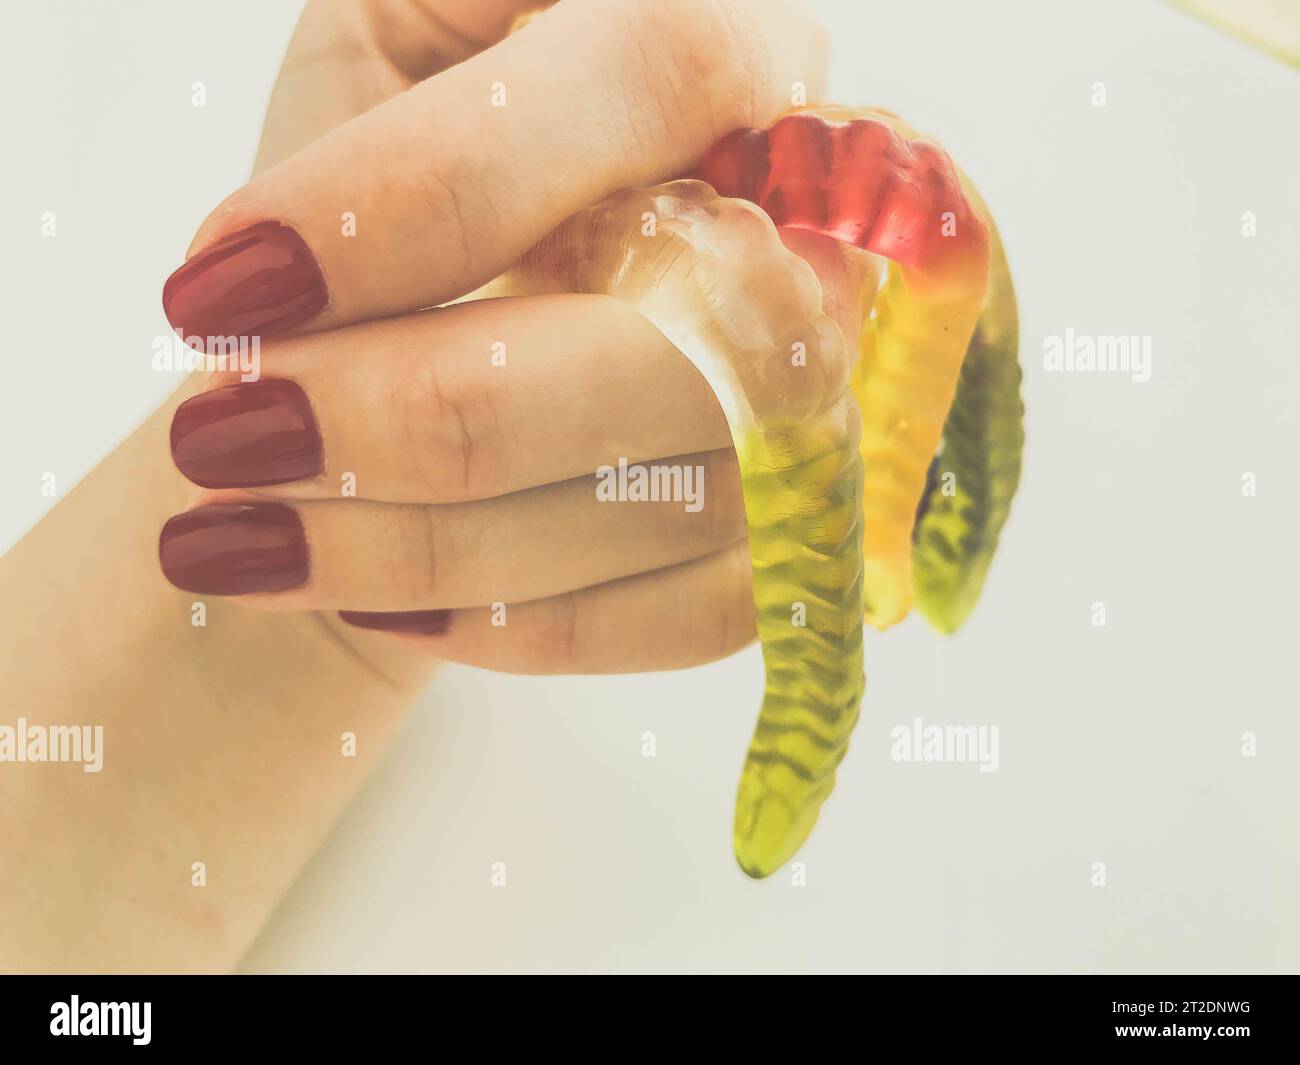 long, mouth-watering, multi-colored worms on the hand of a girl